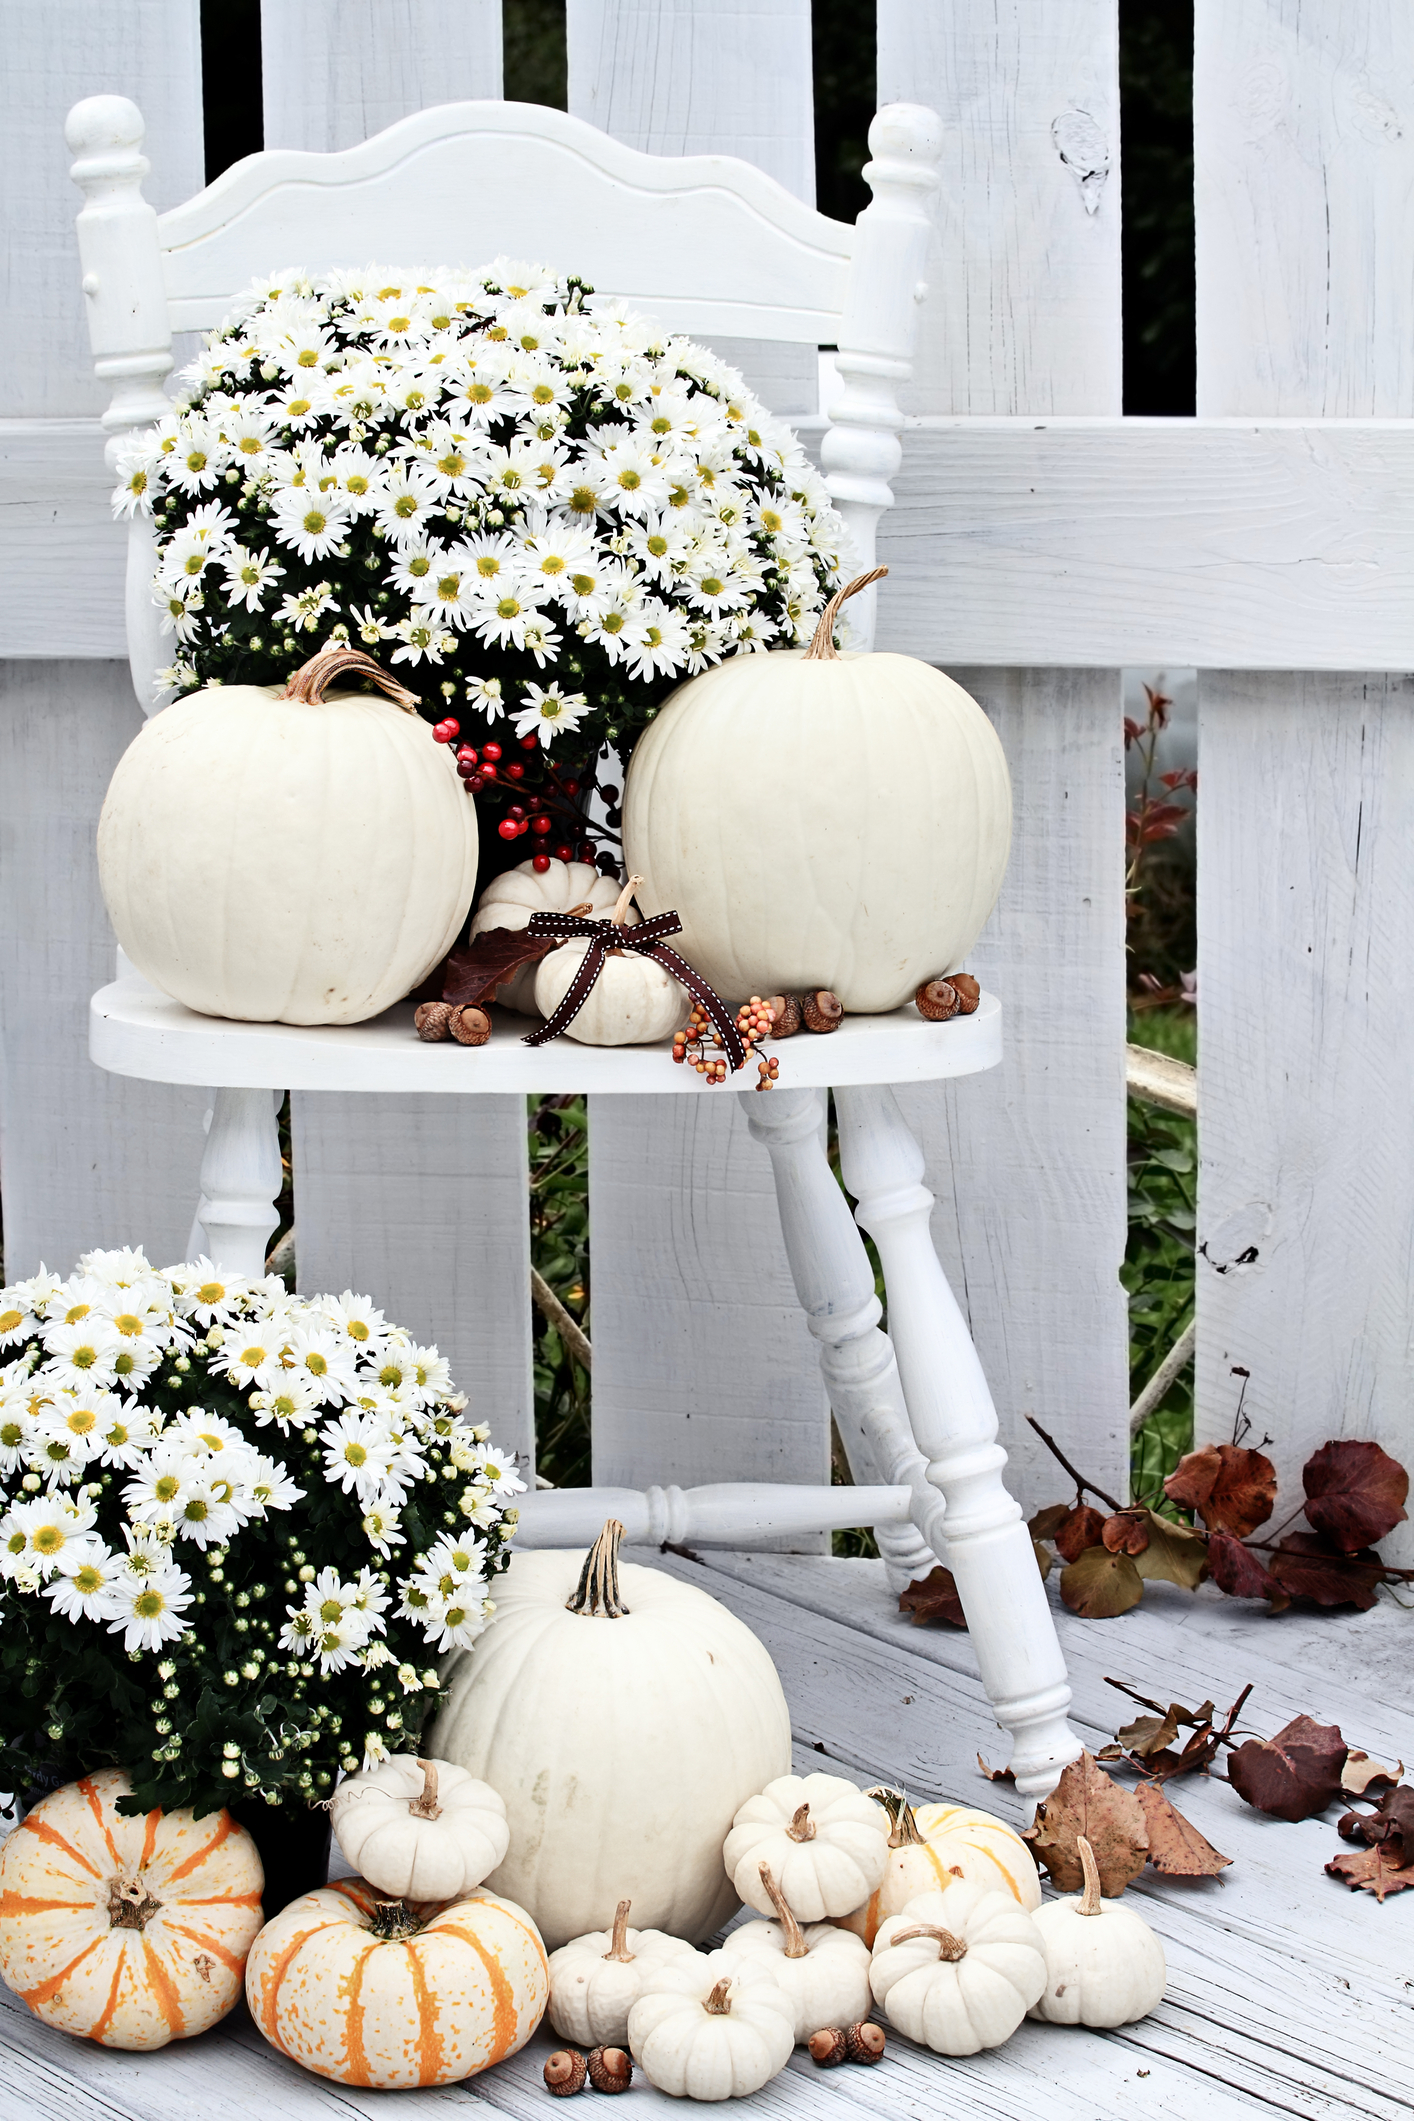 All white for fall decorations, white pumpkins and mums  on a white chair